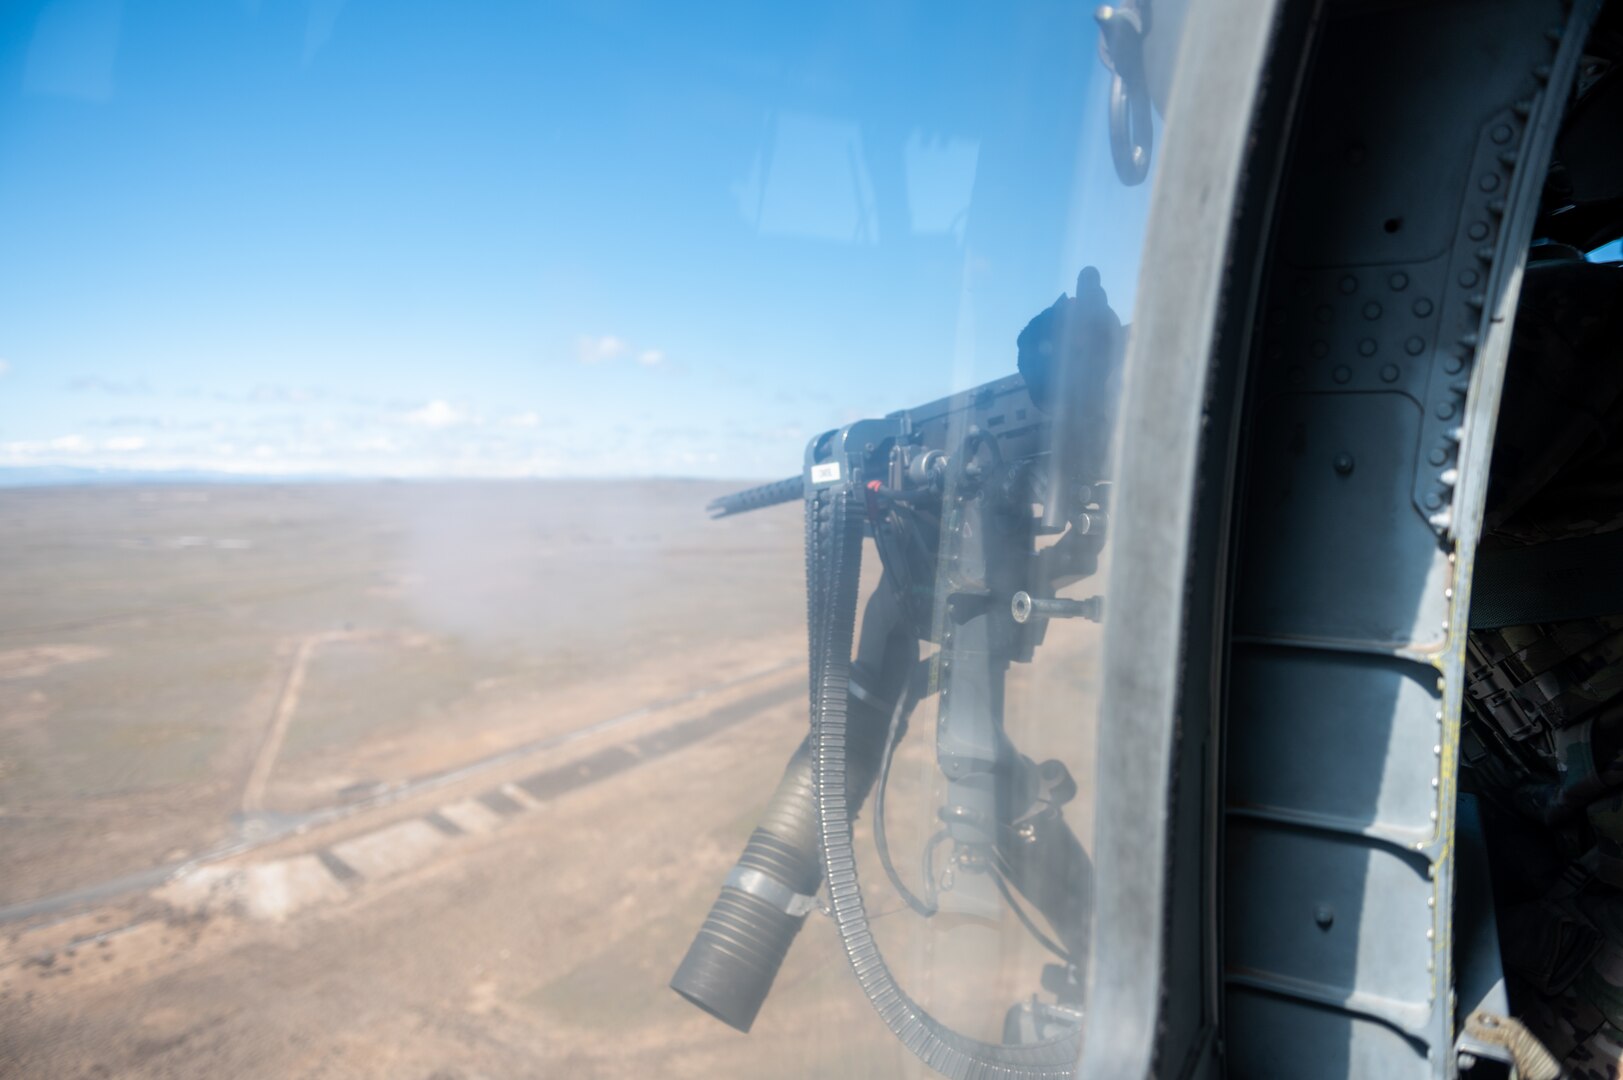 Members from 11 rescue squadrons with HH-60 Pave Hawk helicopters participated in Spud Smoke 21at the Orchard Combat Training Center in Boise, Idaho, March 8-28, 2021.  The exercise focused on the weapons employment fundamentals and dynamic threat environments.